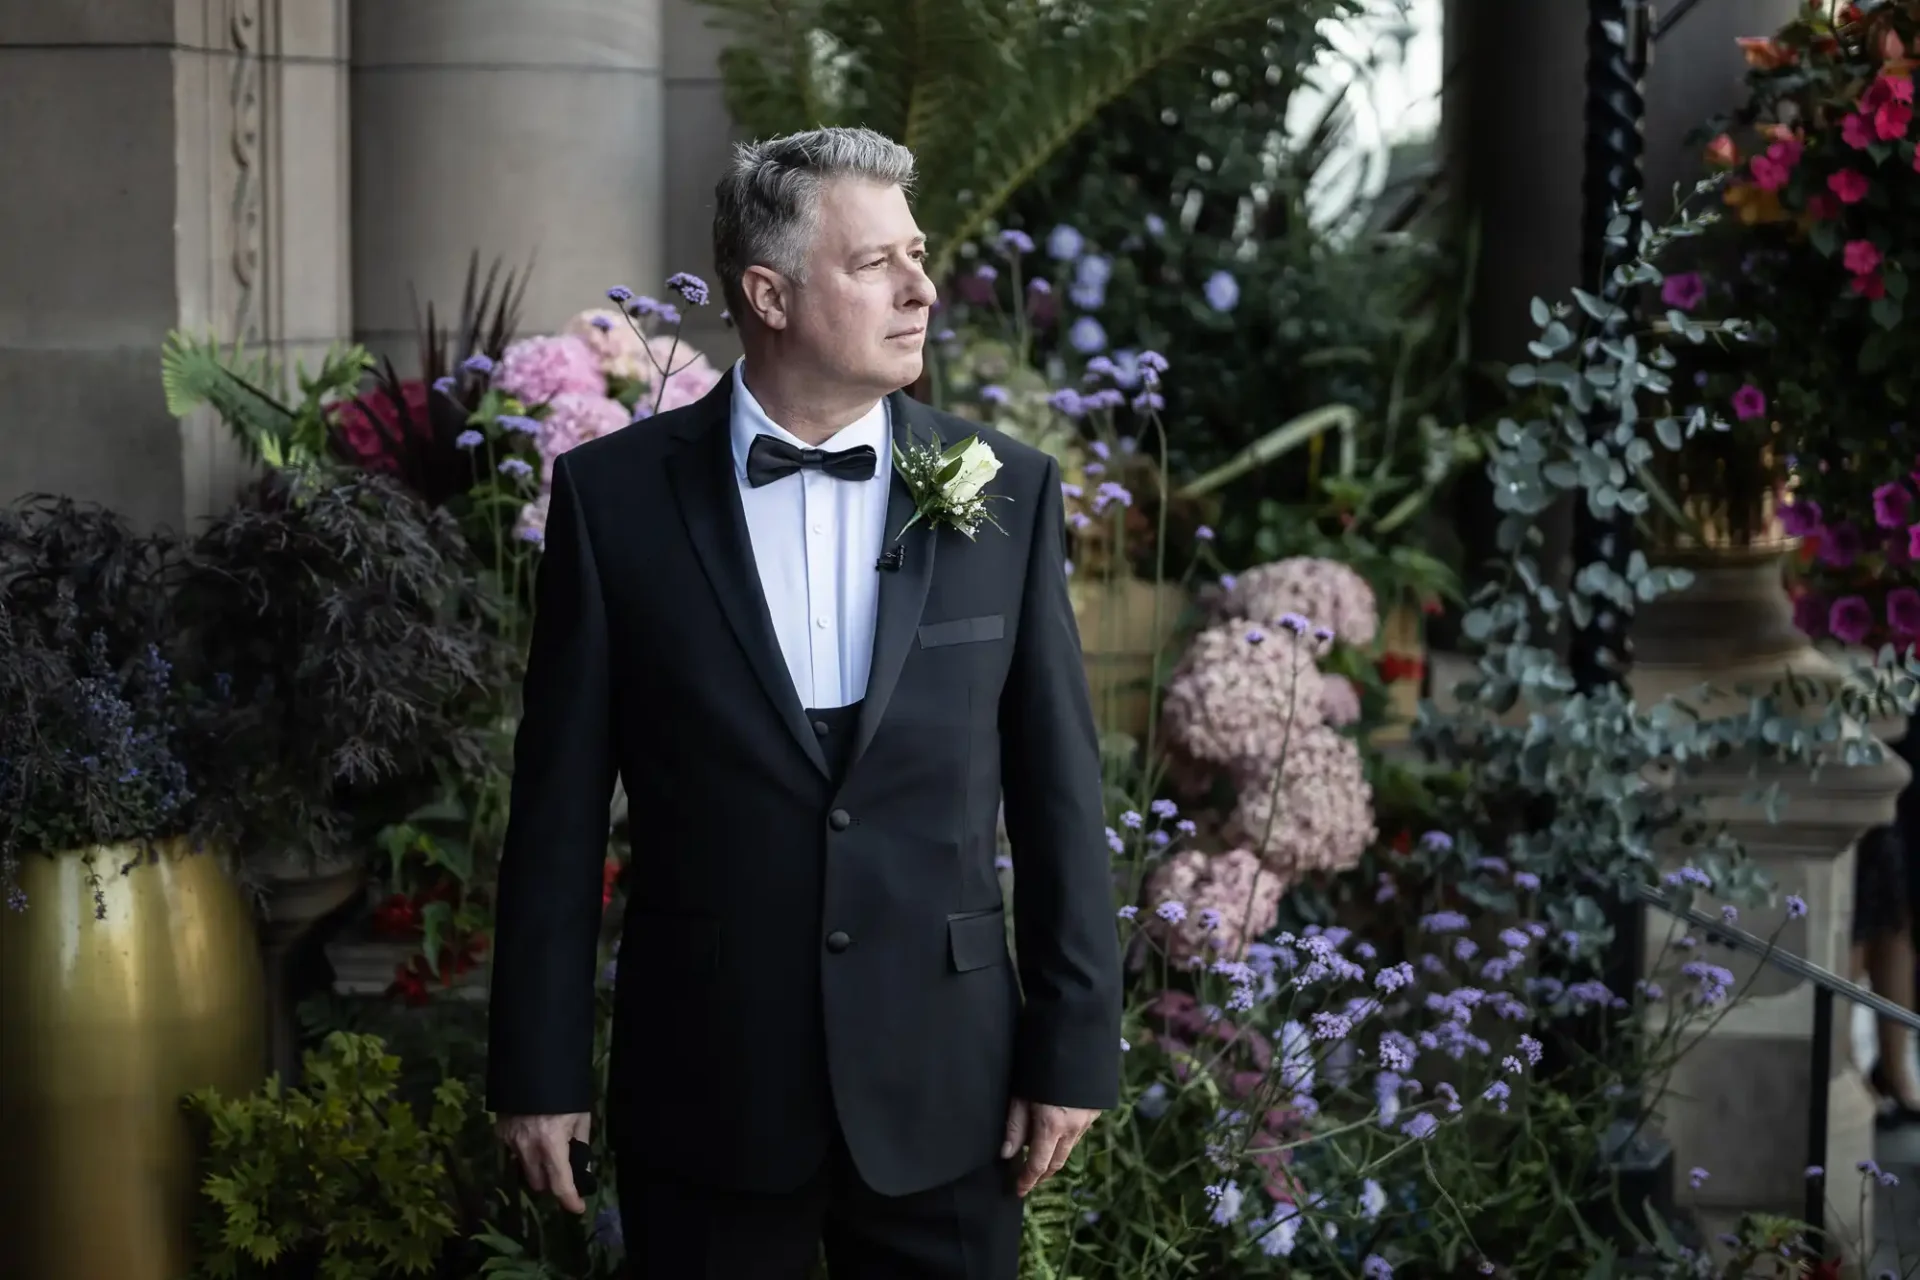 Man in a tuxedo with a boutonniere standing by a floral display at a formal event.